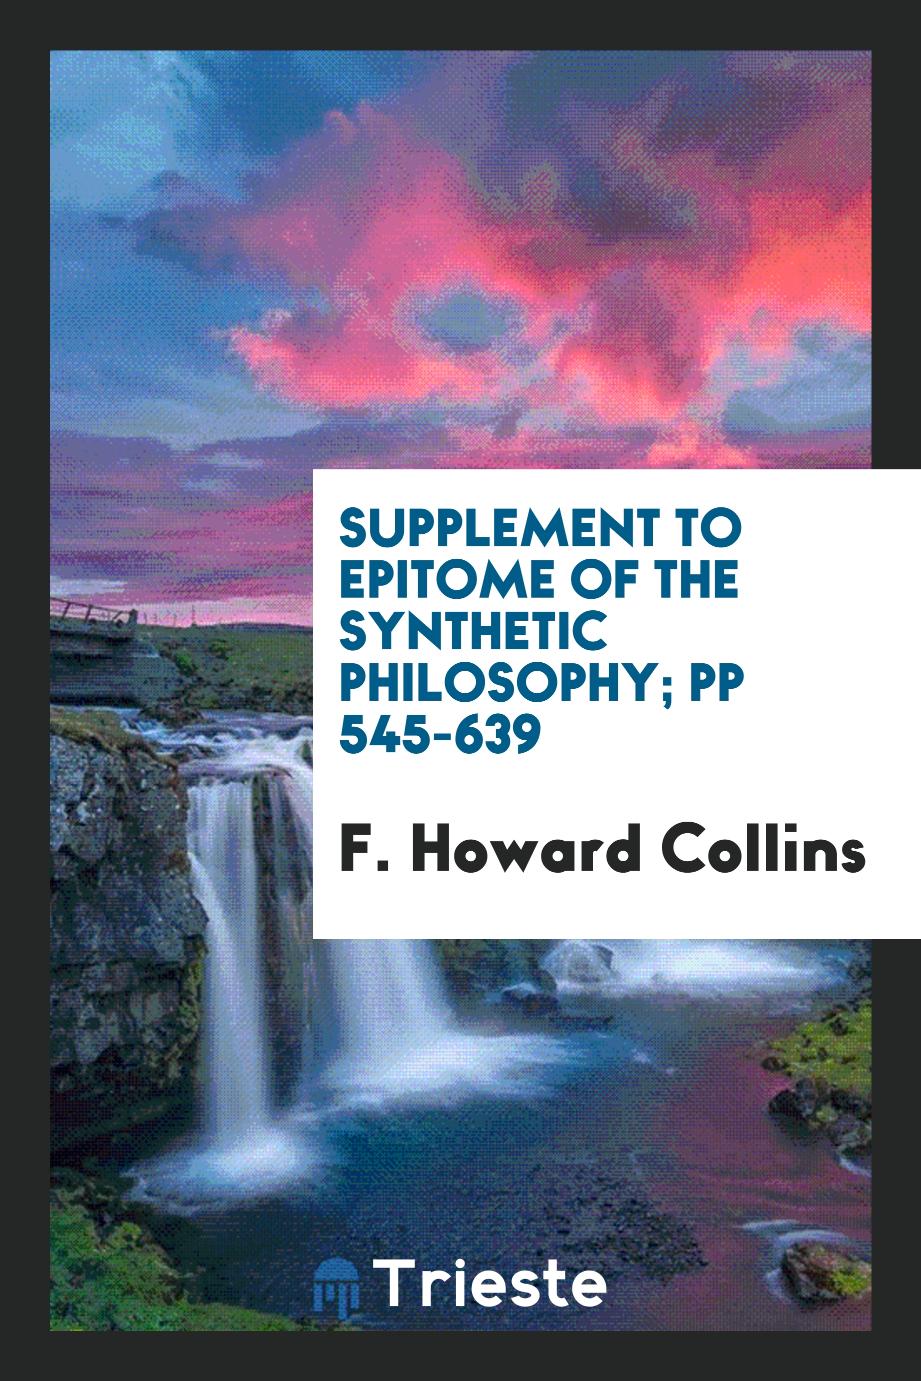 Supplement to Epitome of the Synthetic Philosophy; pp 545-639